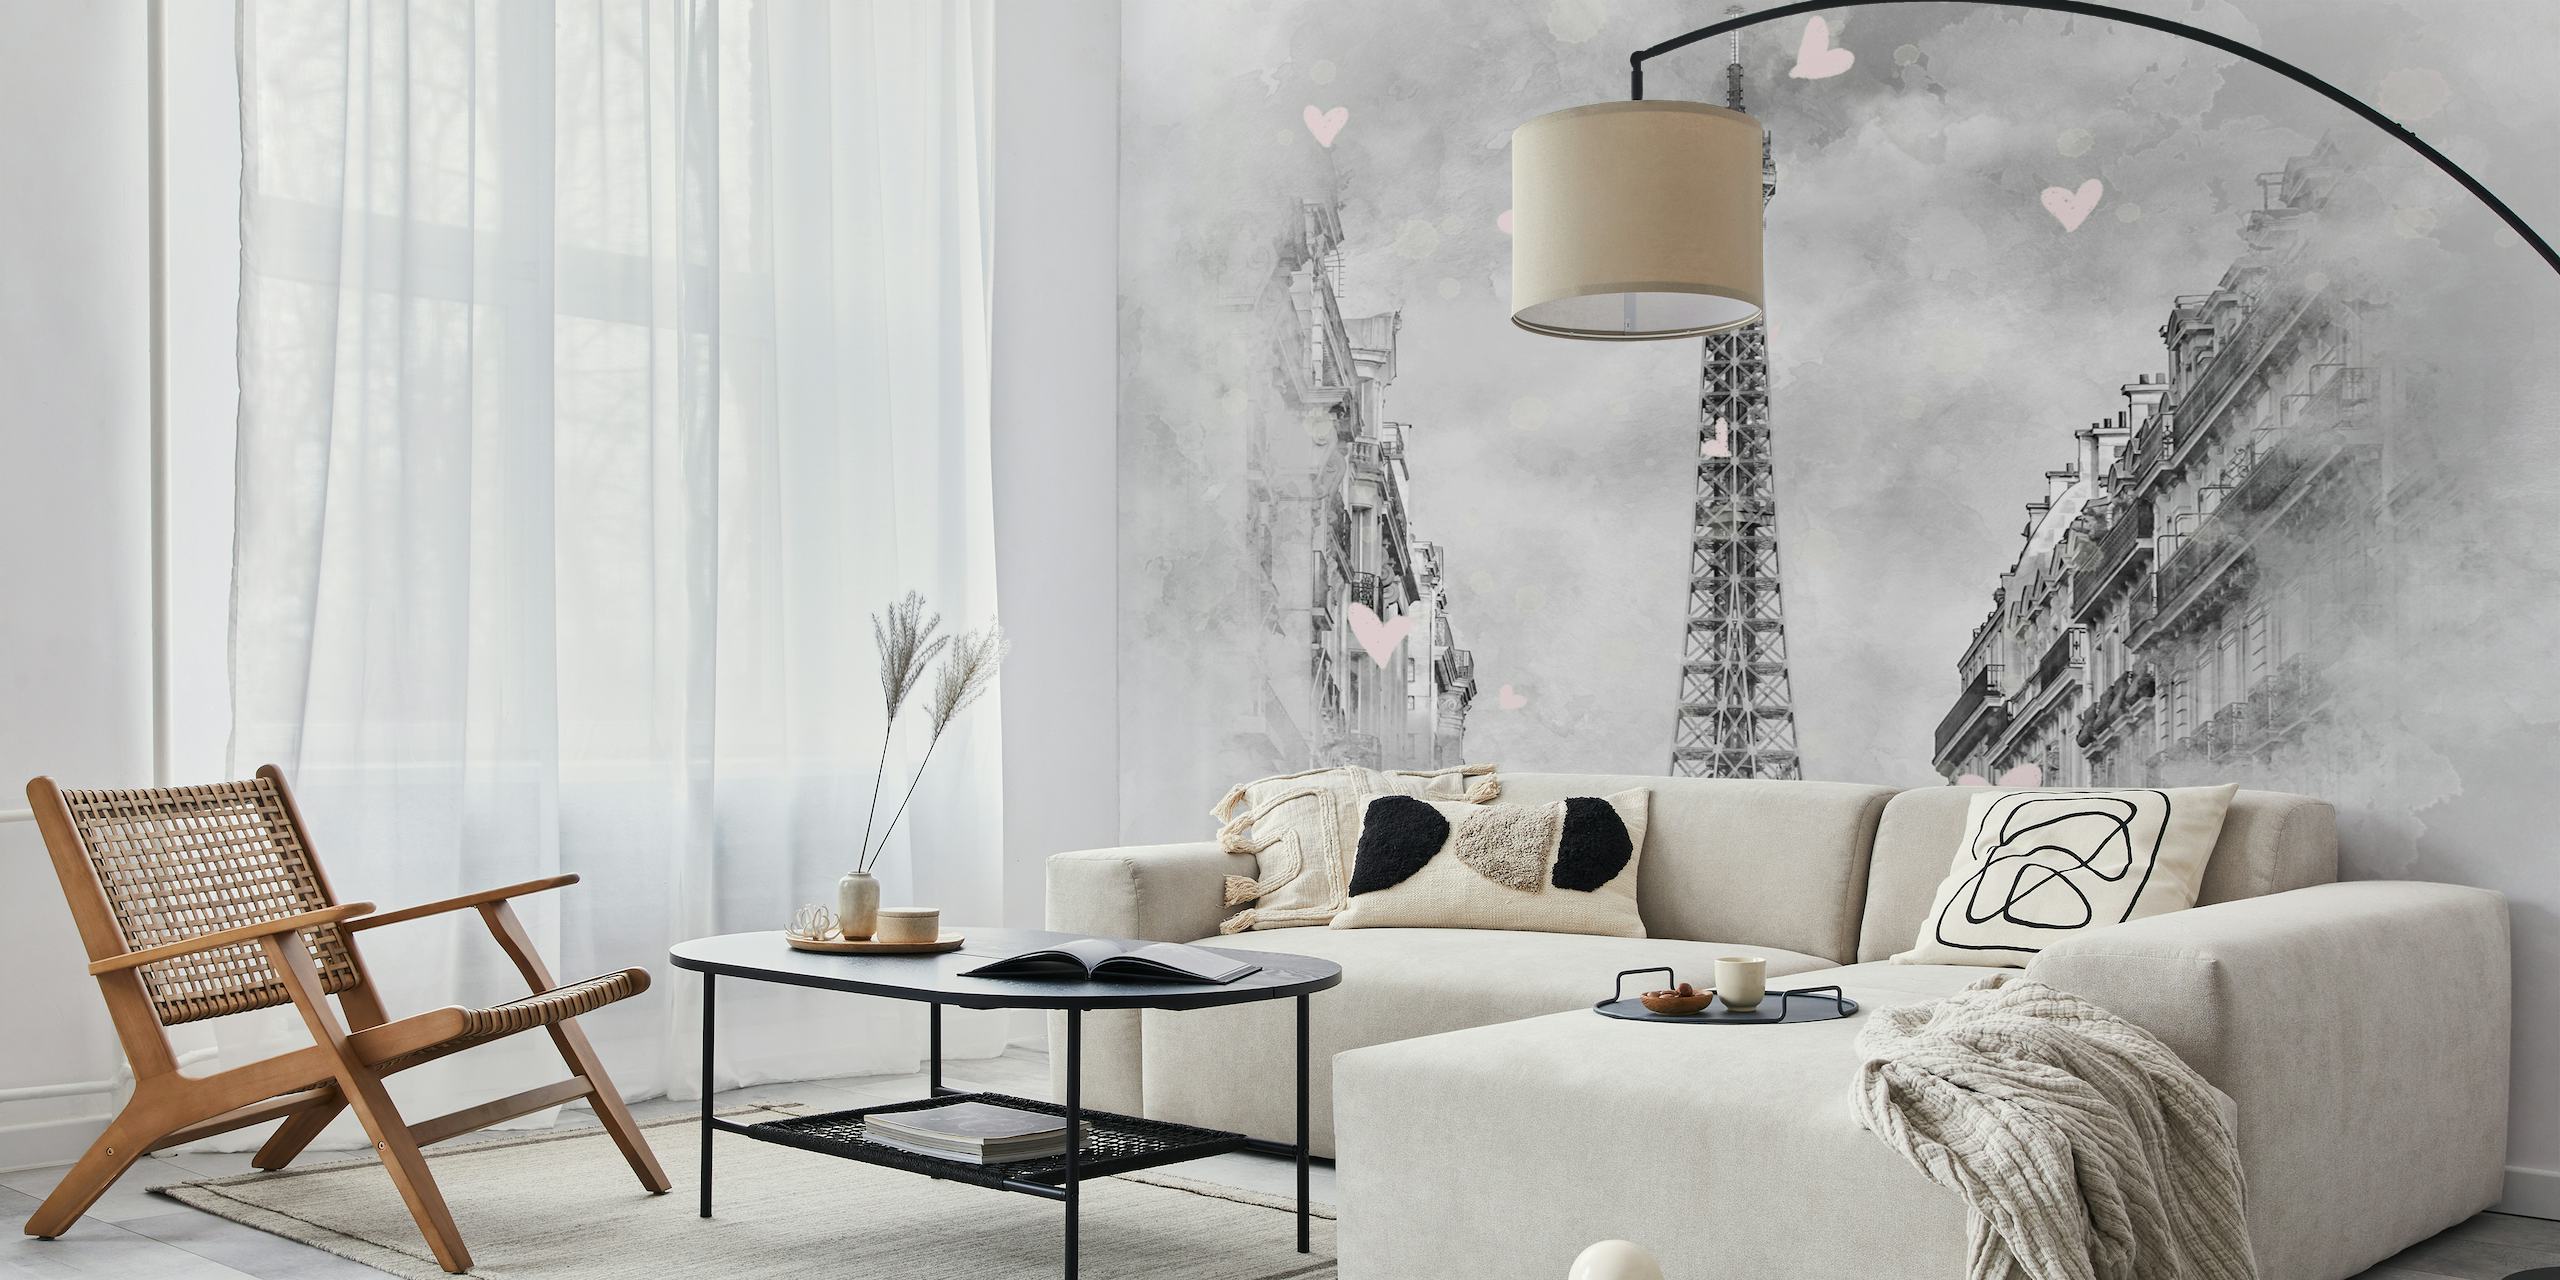 Monochrome Parisian wall mural with pink hearts and the Eiffel Tower